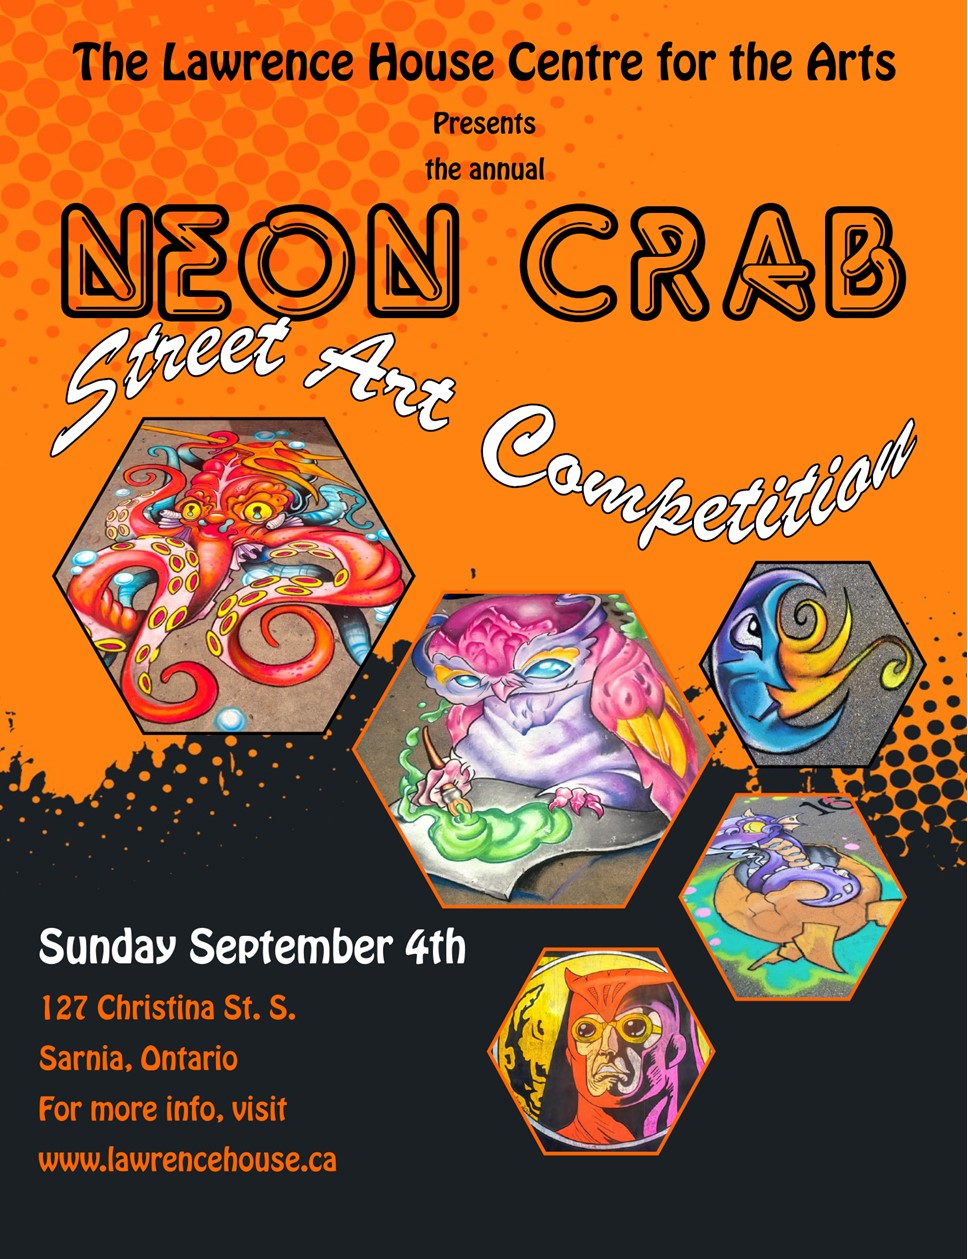 Street Art Competition